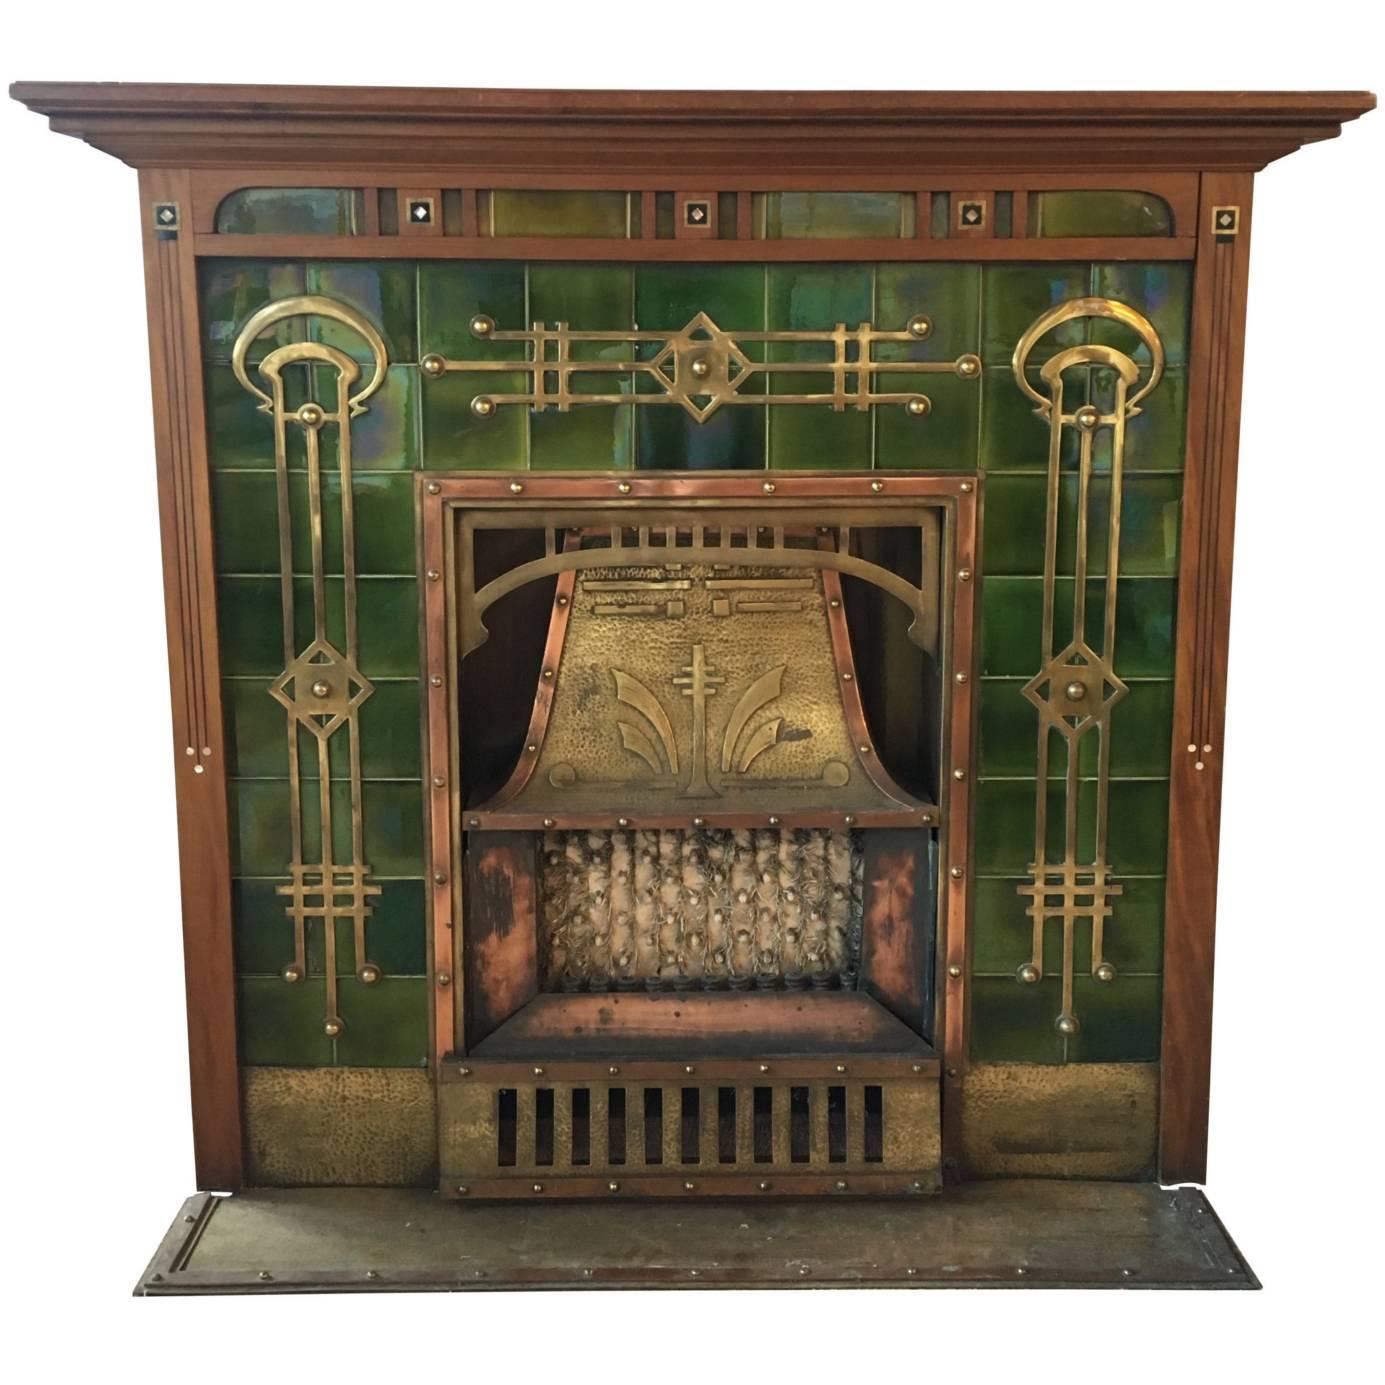 Breathtaking Art Deco Fireplace, circa 1920s For Sale at